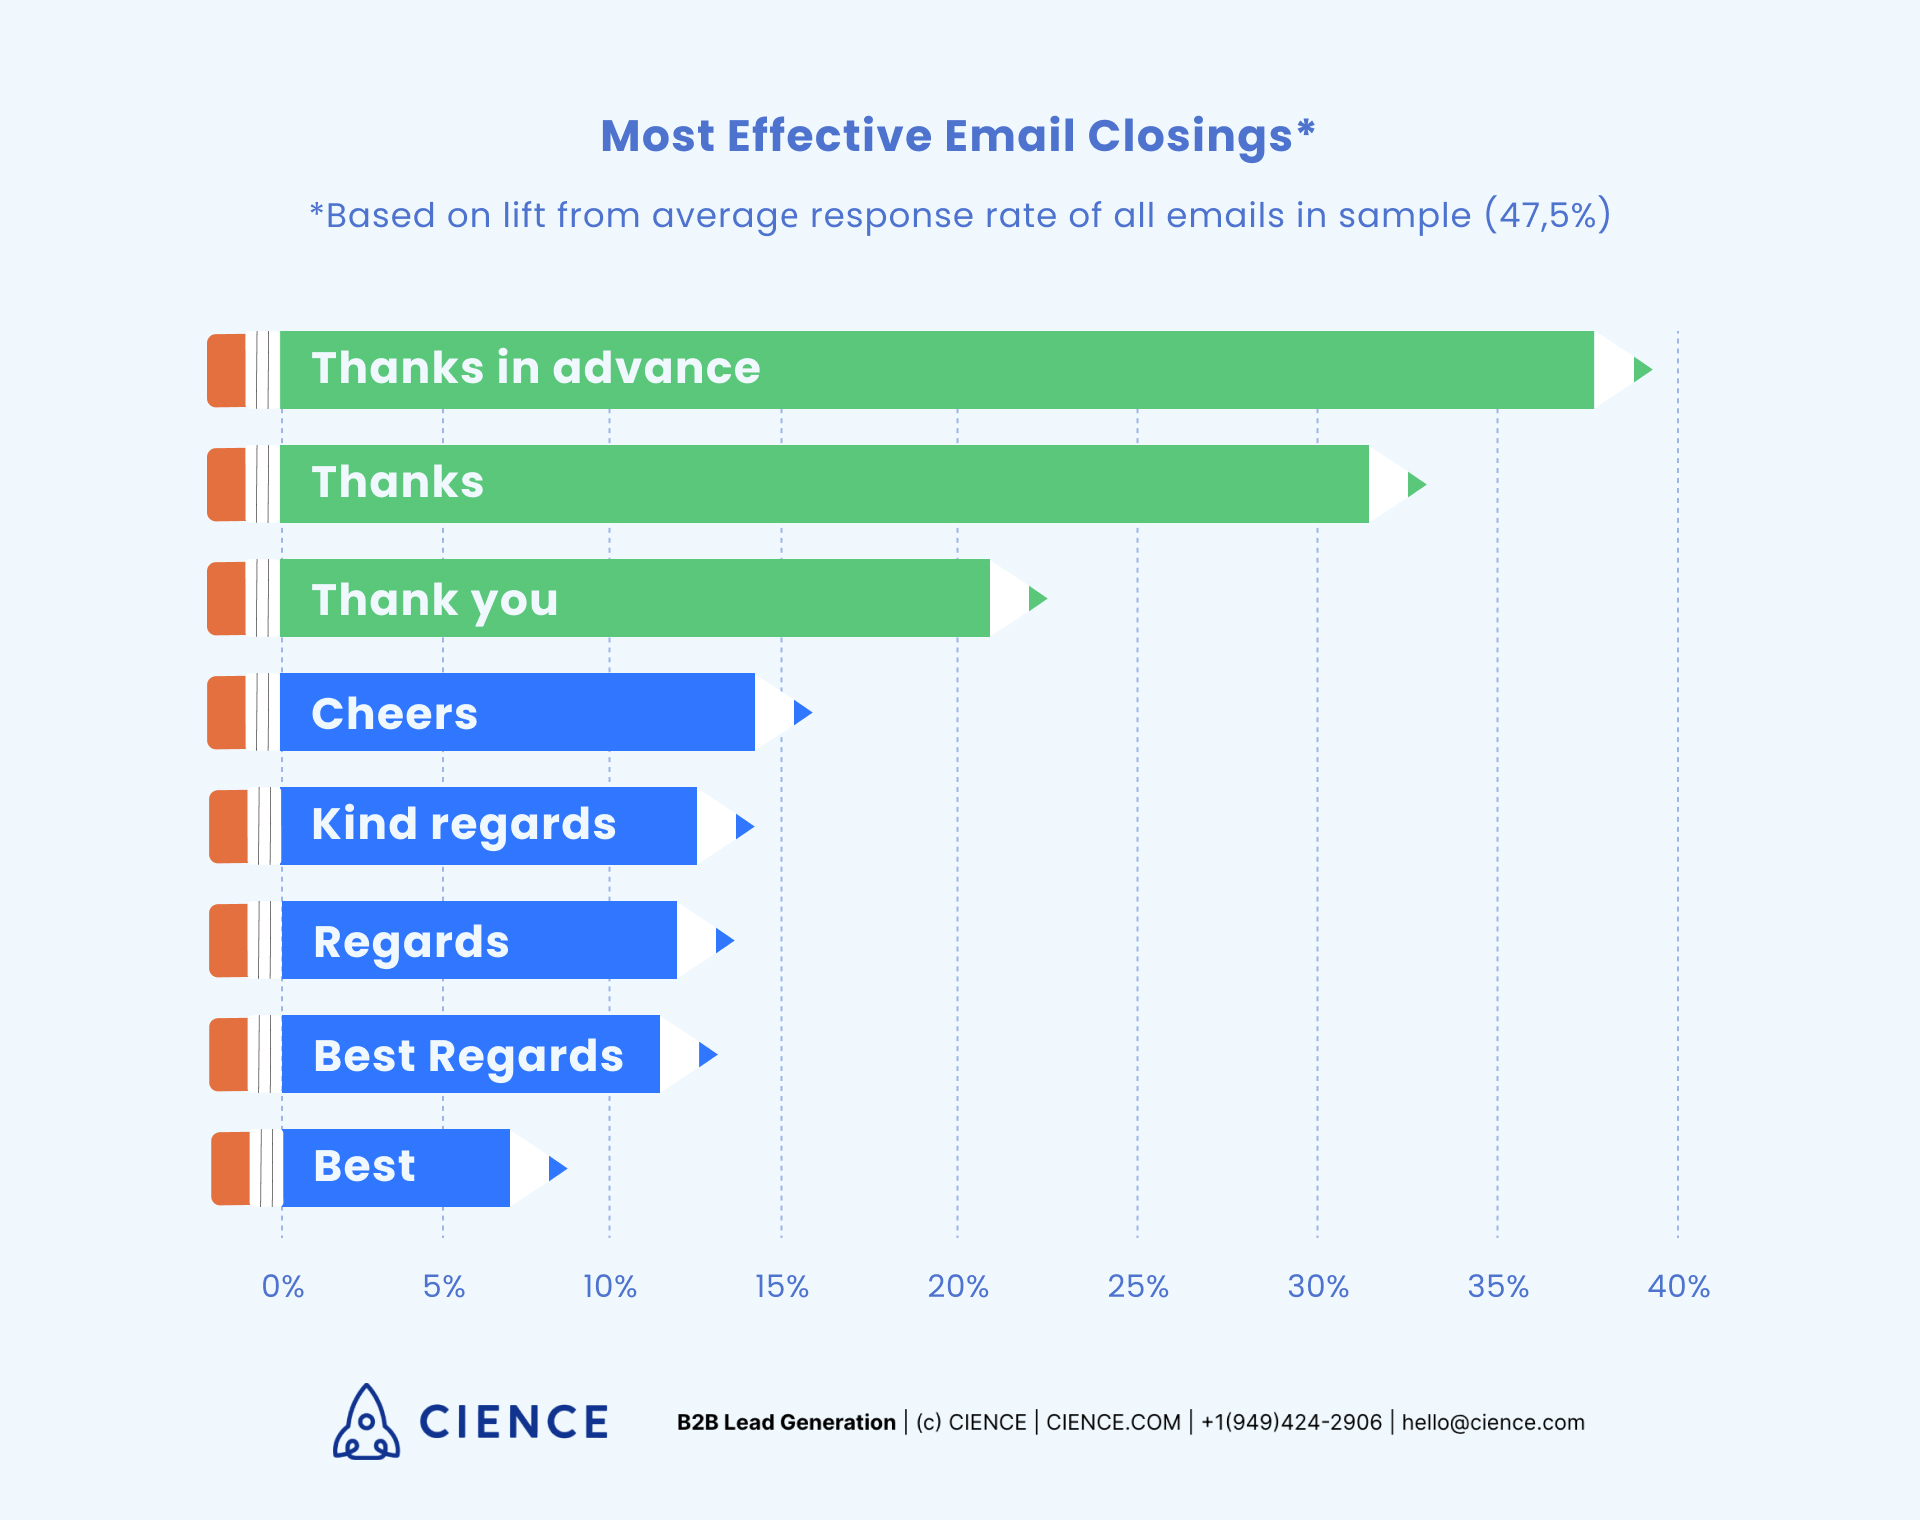 Most effective email closings